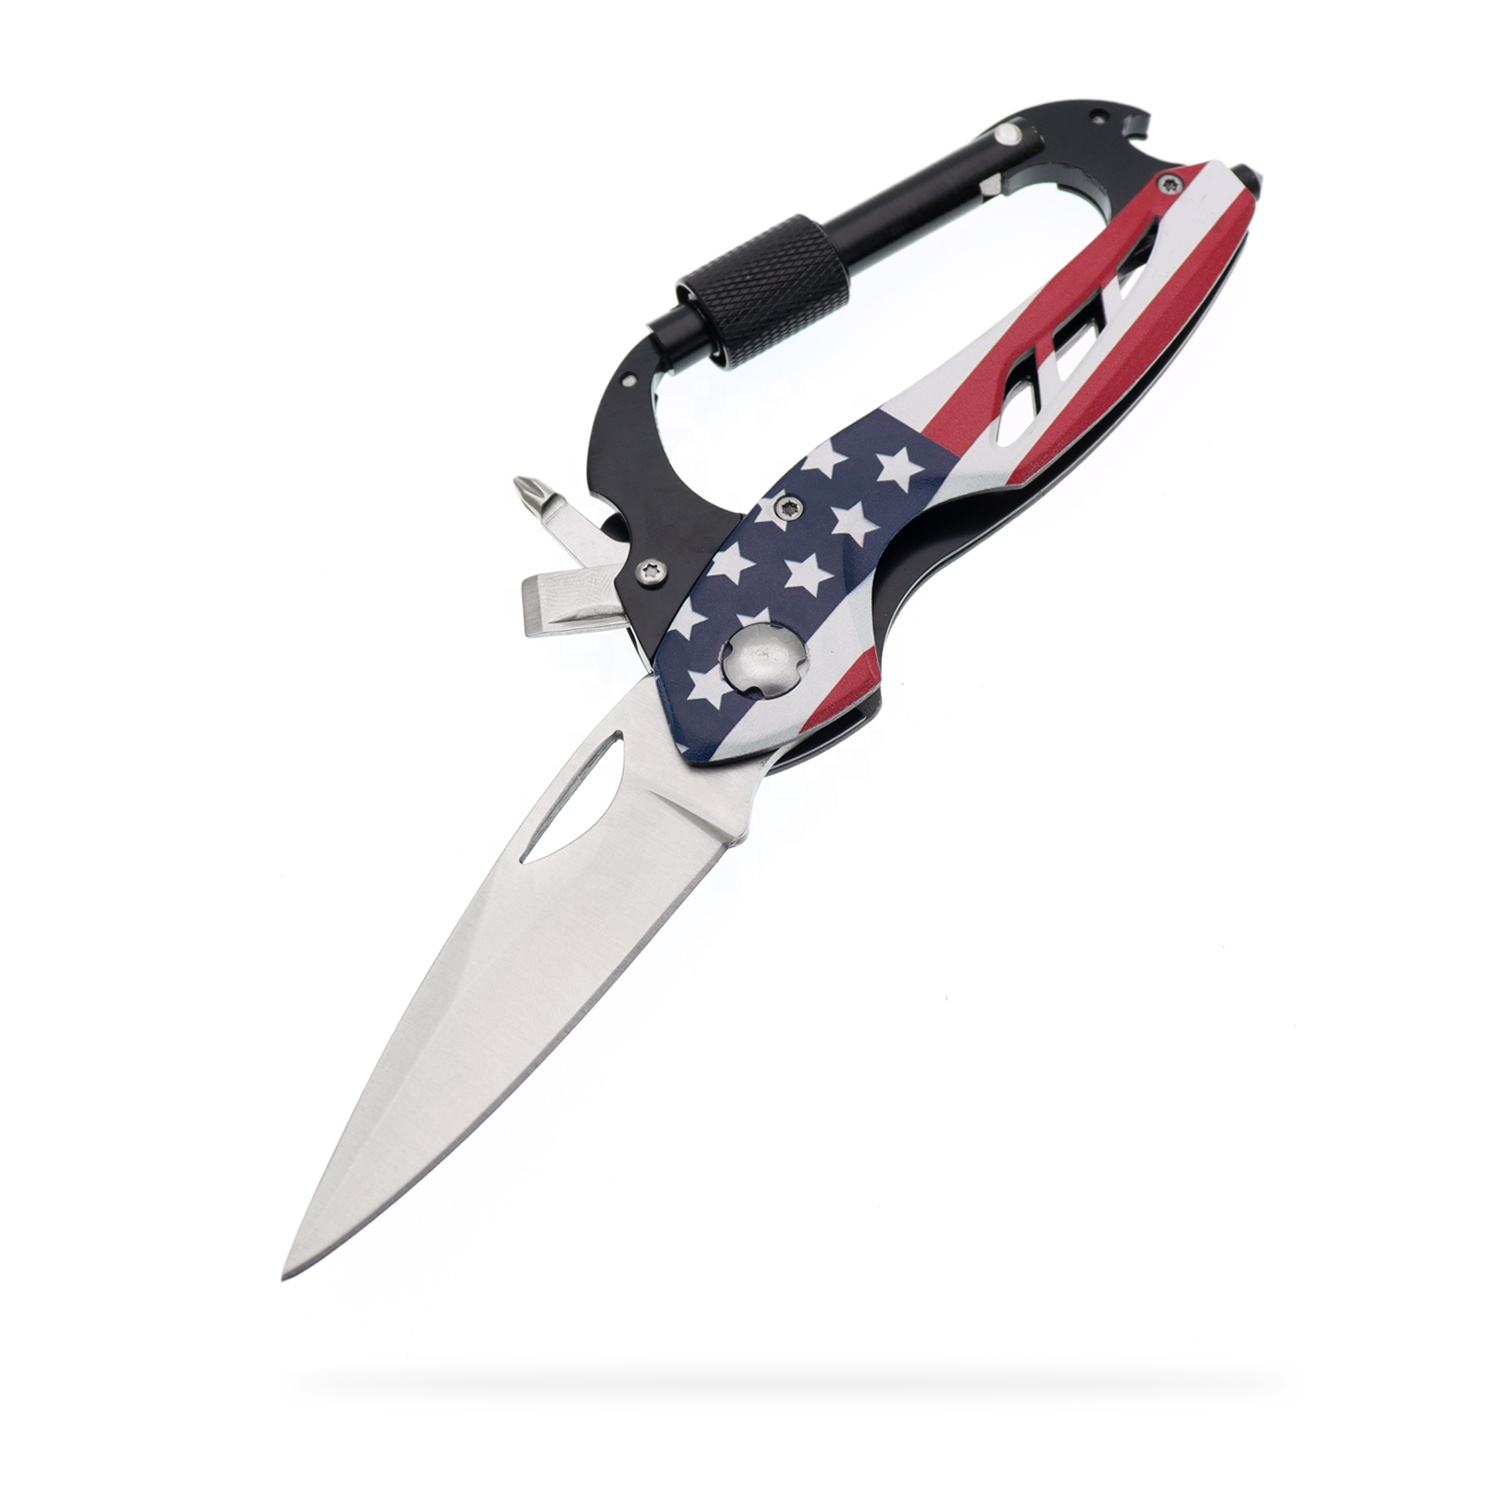 Supply Camo Flag Carabiner With Pocket Knife, Edc Carabiners Keychain With Folding Knives Bottle Opener Window Breaker And Screwdriver